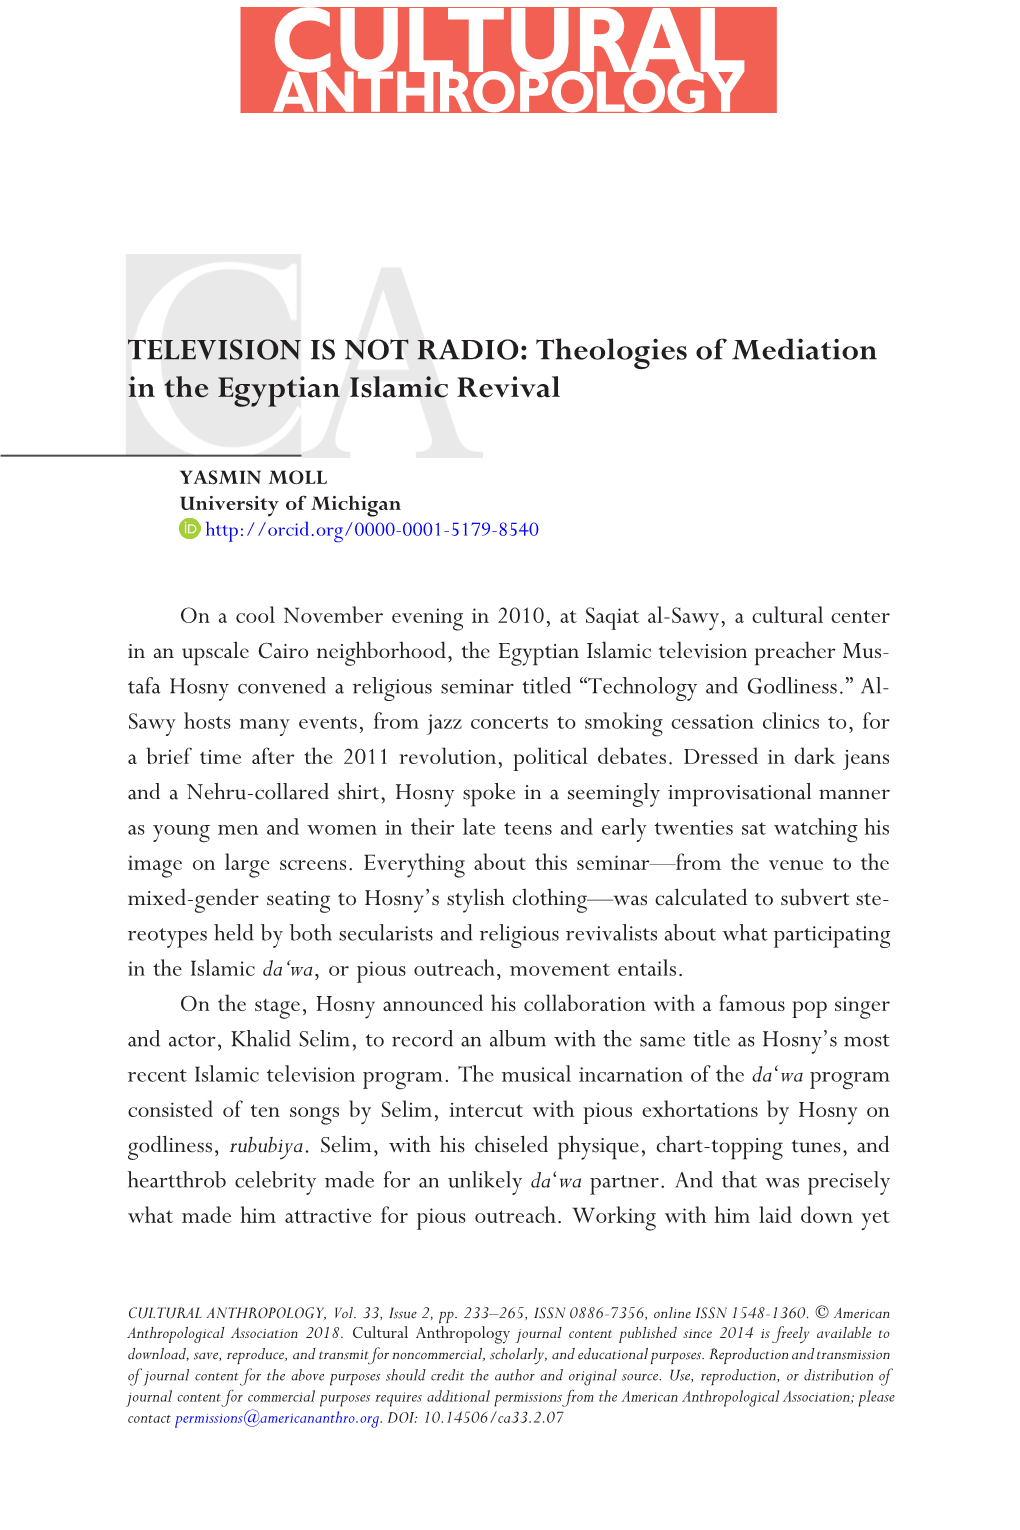 TELEVISION IS NOT RADIO: Theologies of Mediation in the Egyptian Islamic Revival